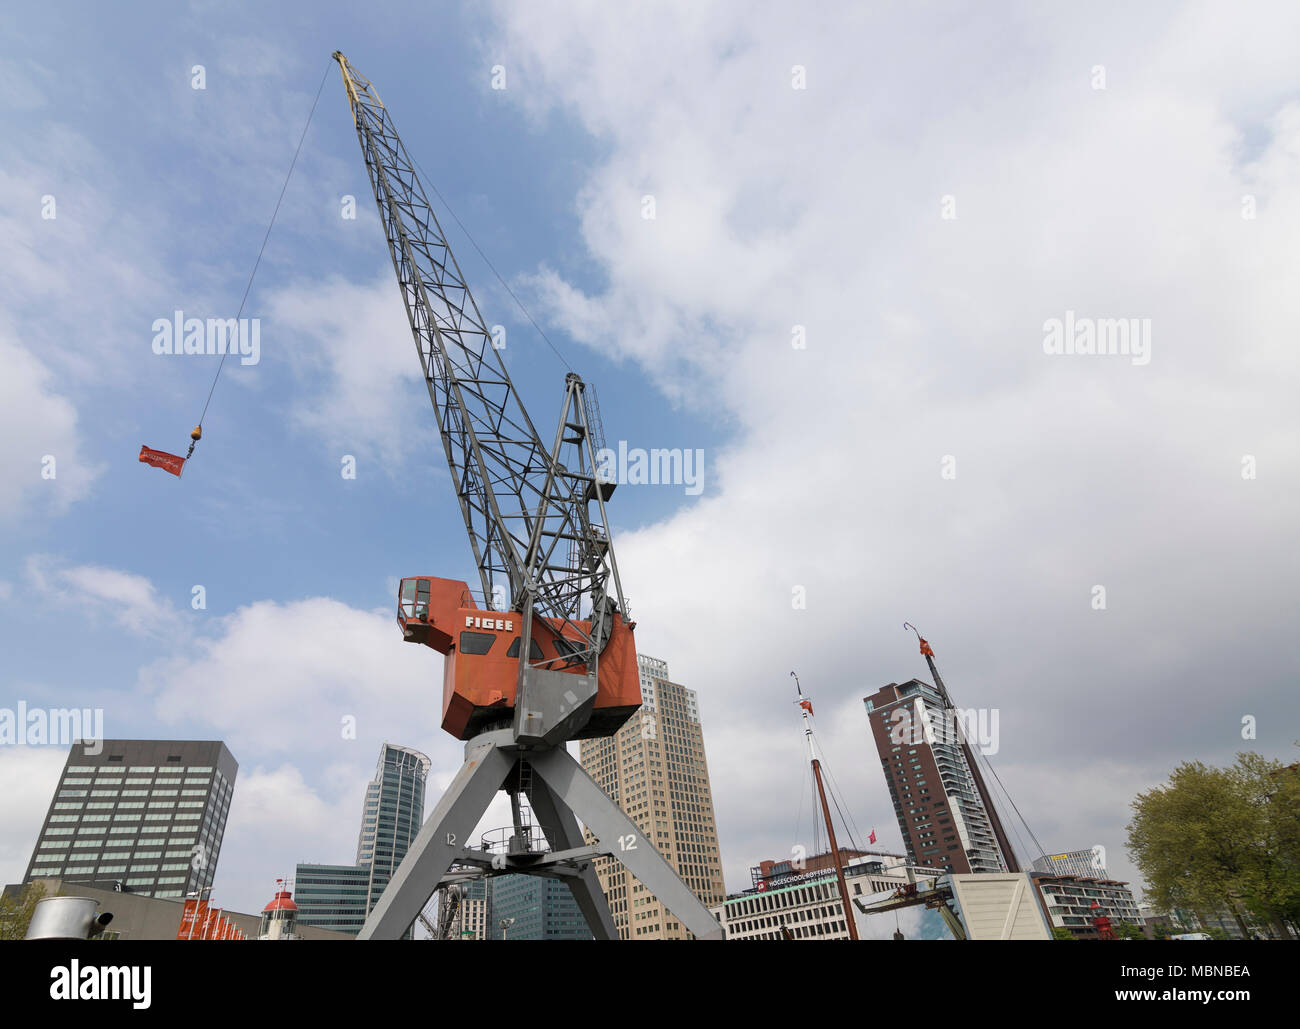 Historical crane in the old inner city harbor of Rotterdam, Netherlands Stock Photo